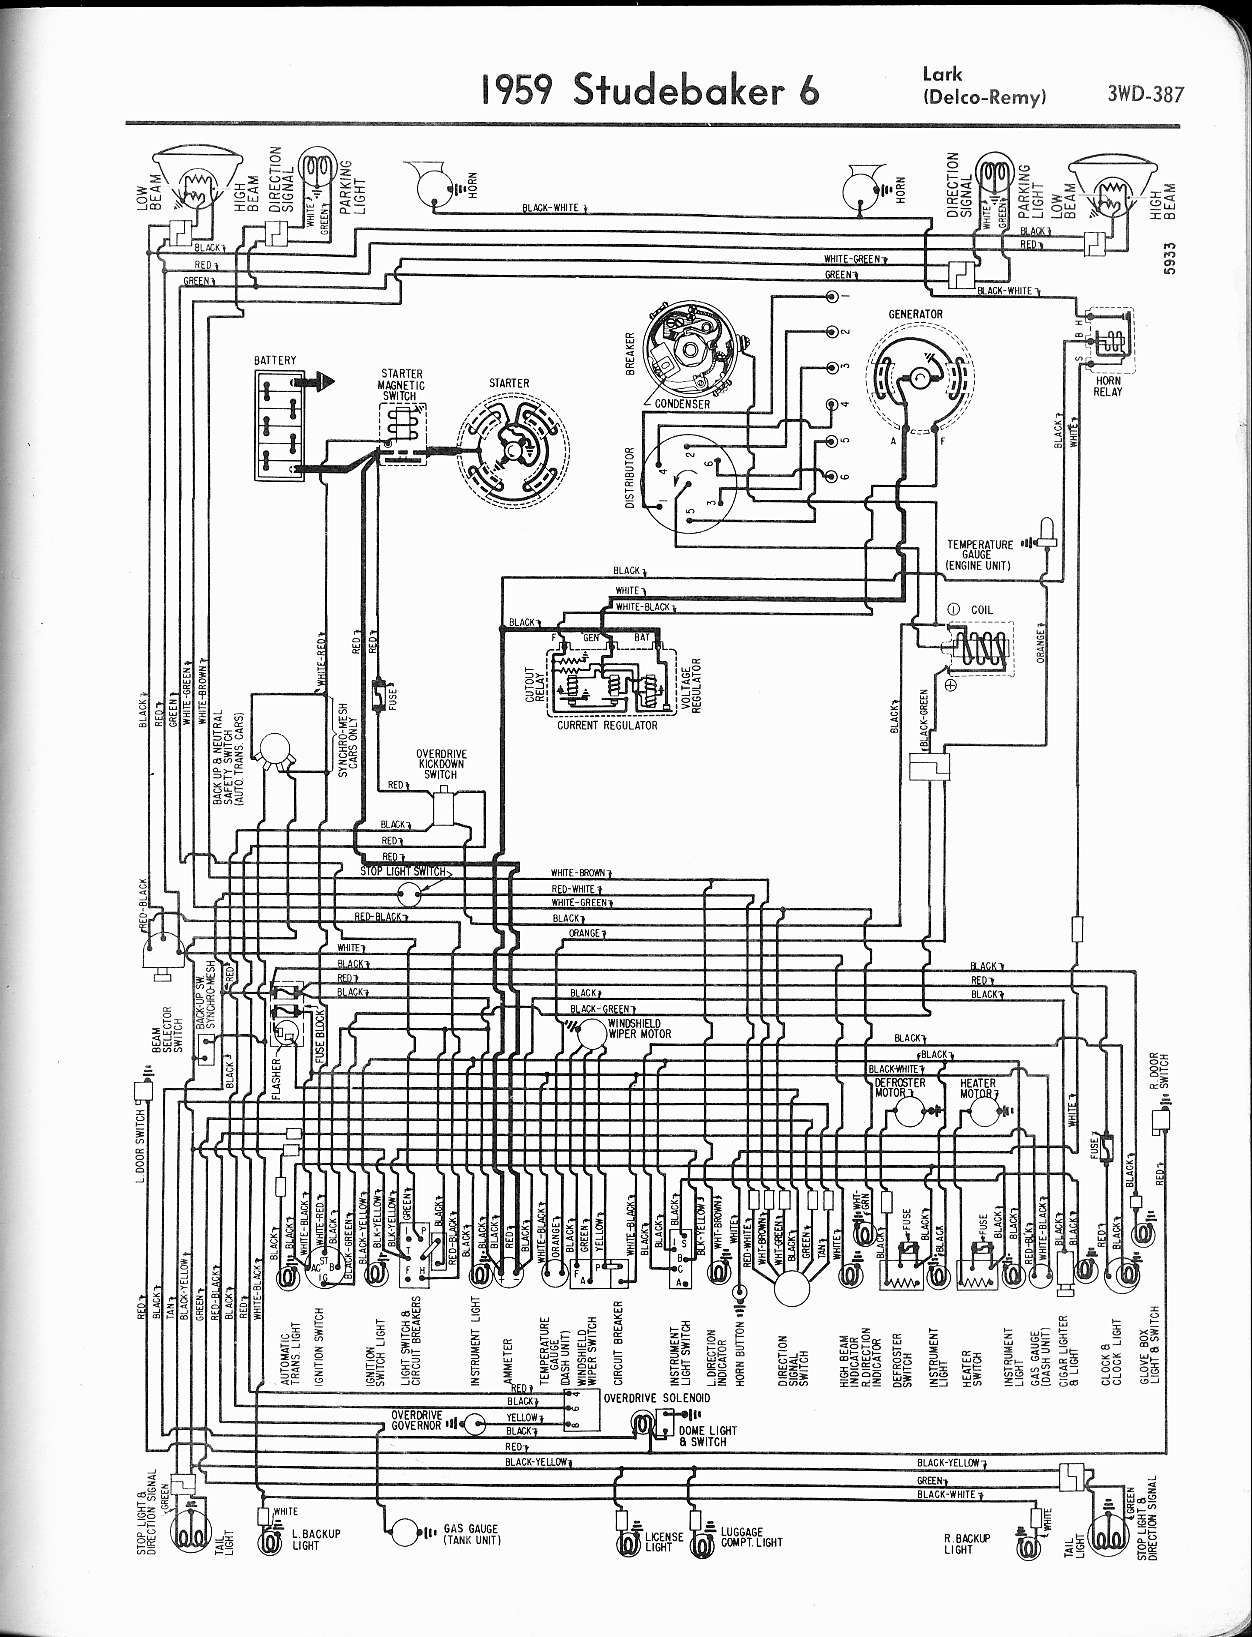 Studebaker wiring diagrams - The Old Car Manual Project 1957 chevrolet fuse box diagram 